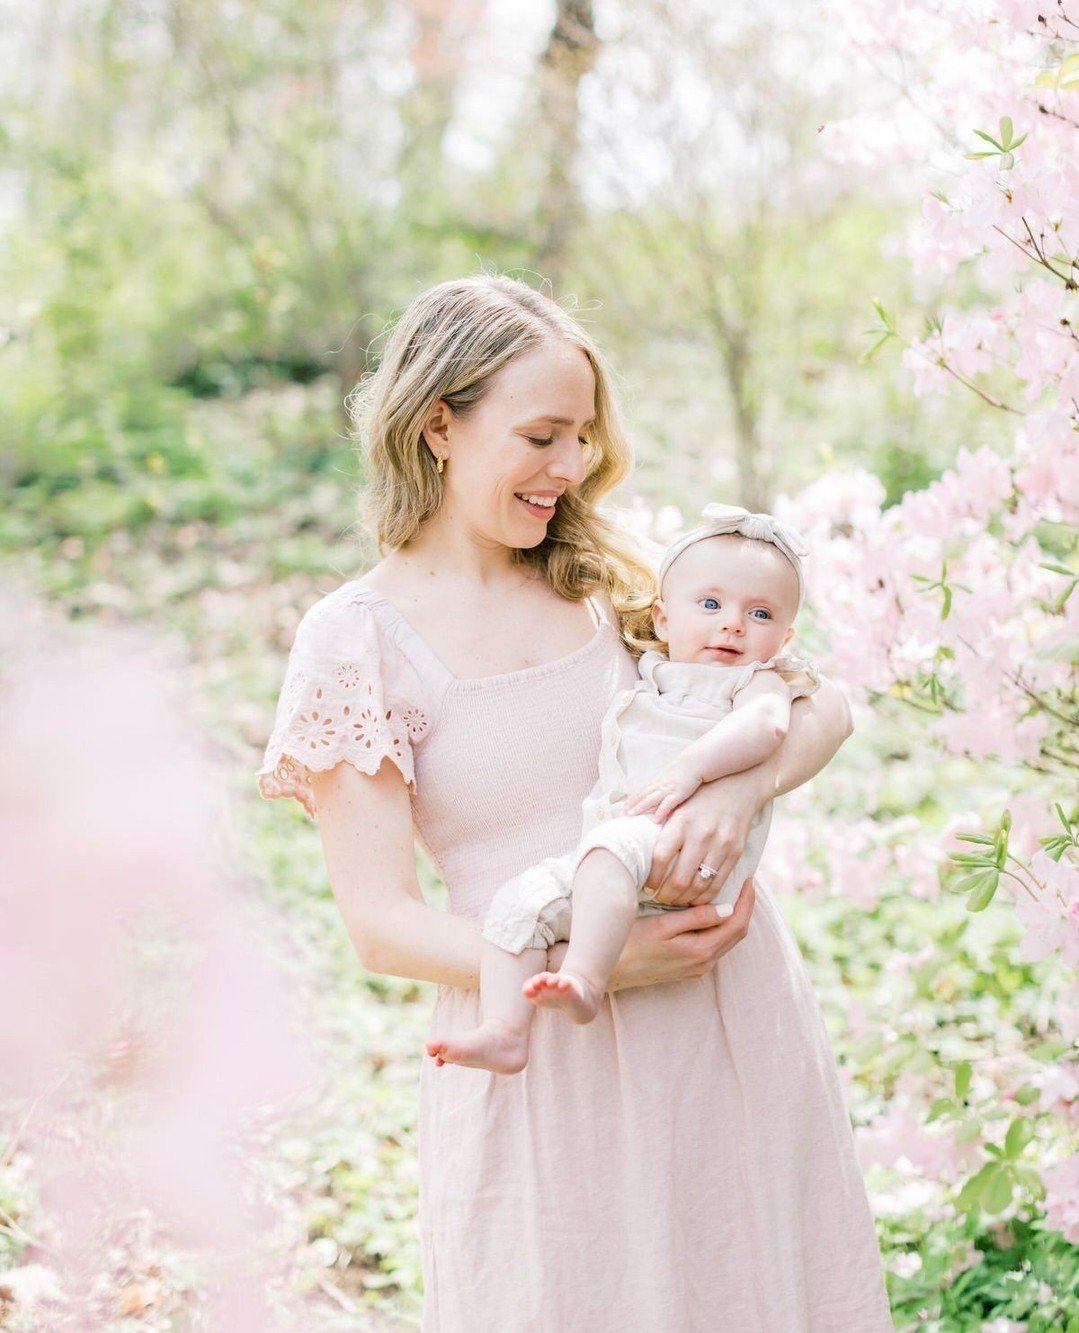 it's been a week since we held spring minis in new haven, and, suffice to say, they were an incredible success.  the sun was shining, the breeze was cool, and the flowers were blooming everywhere 🌸⁠
⁠
if you missed out on this season's mini sessions